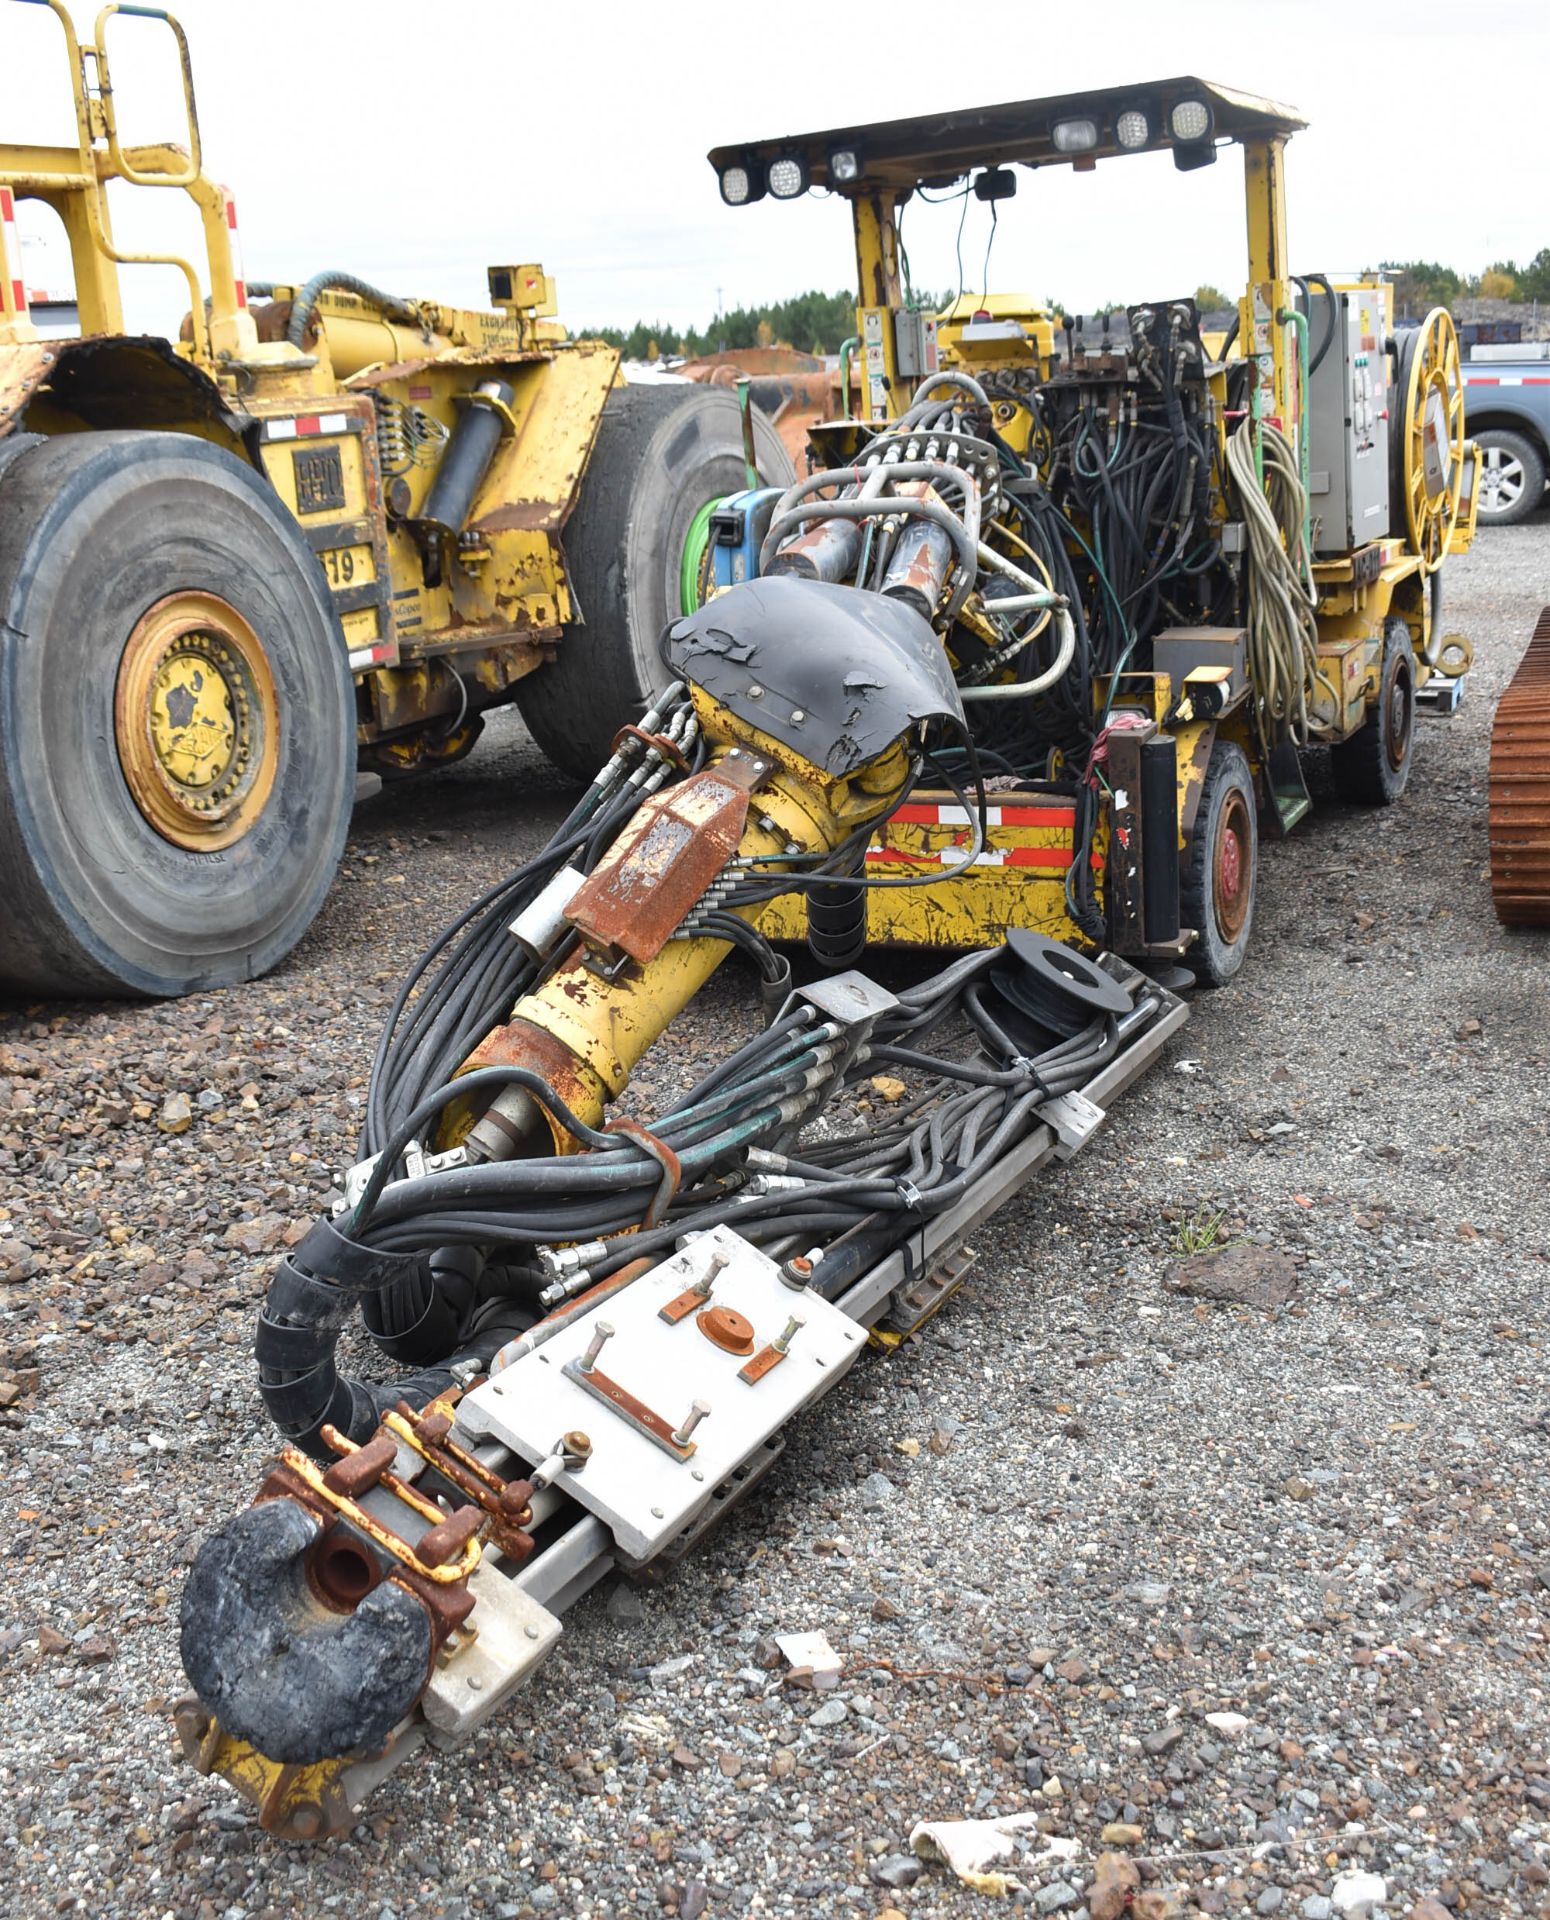 ATLAS COPCO 281 SINGLE BOOMER JUMBO ROCK DRILL WITH E5L912W DIESEL MOTOR, 1342 HOURS (RECORDED ON